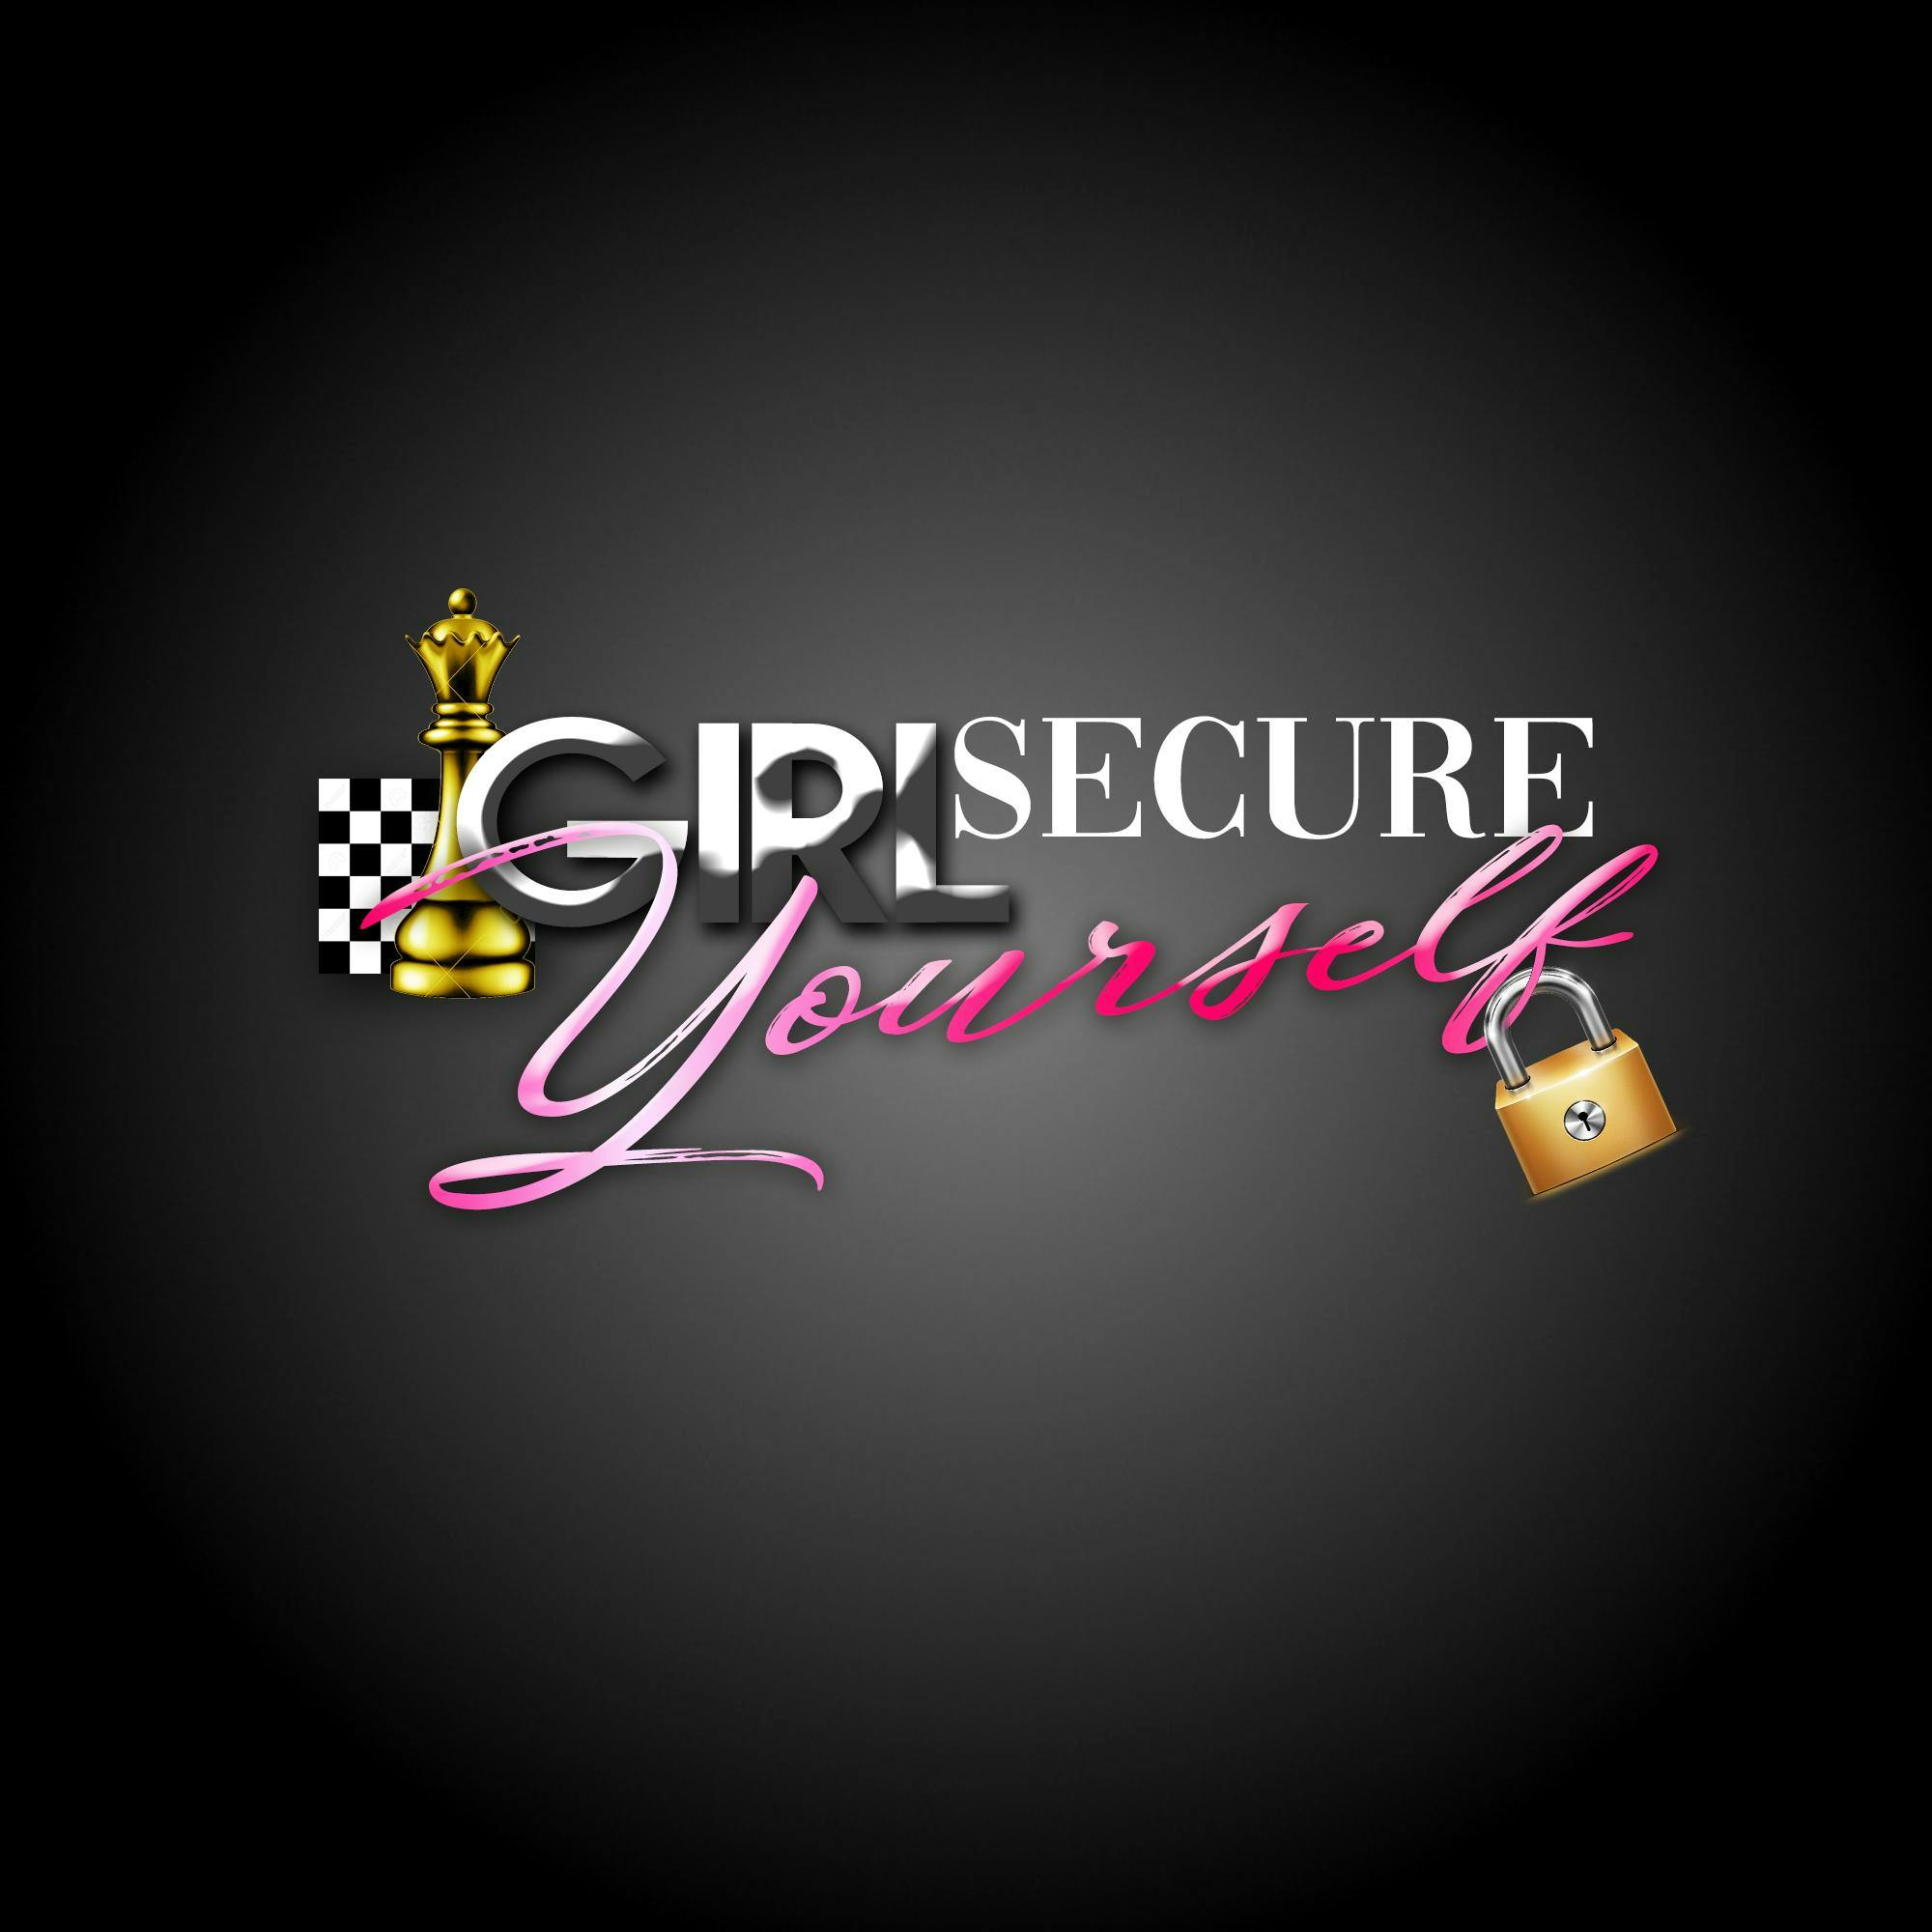 Girl Secure Yourself Book & Non Profit Organization Launch